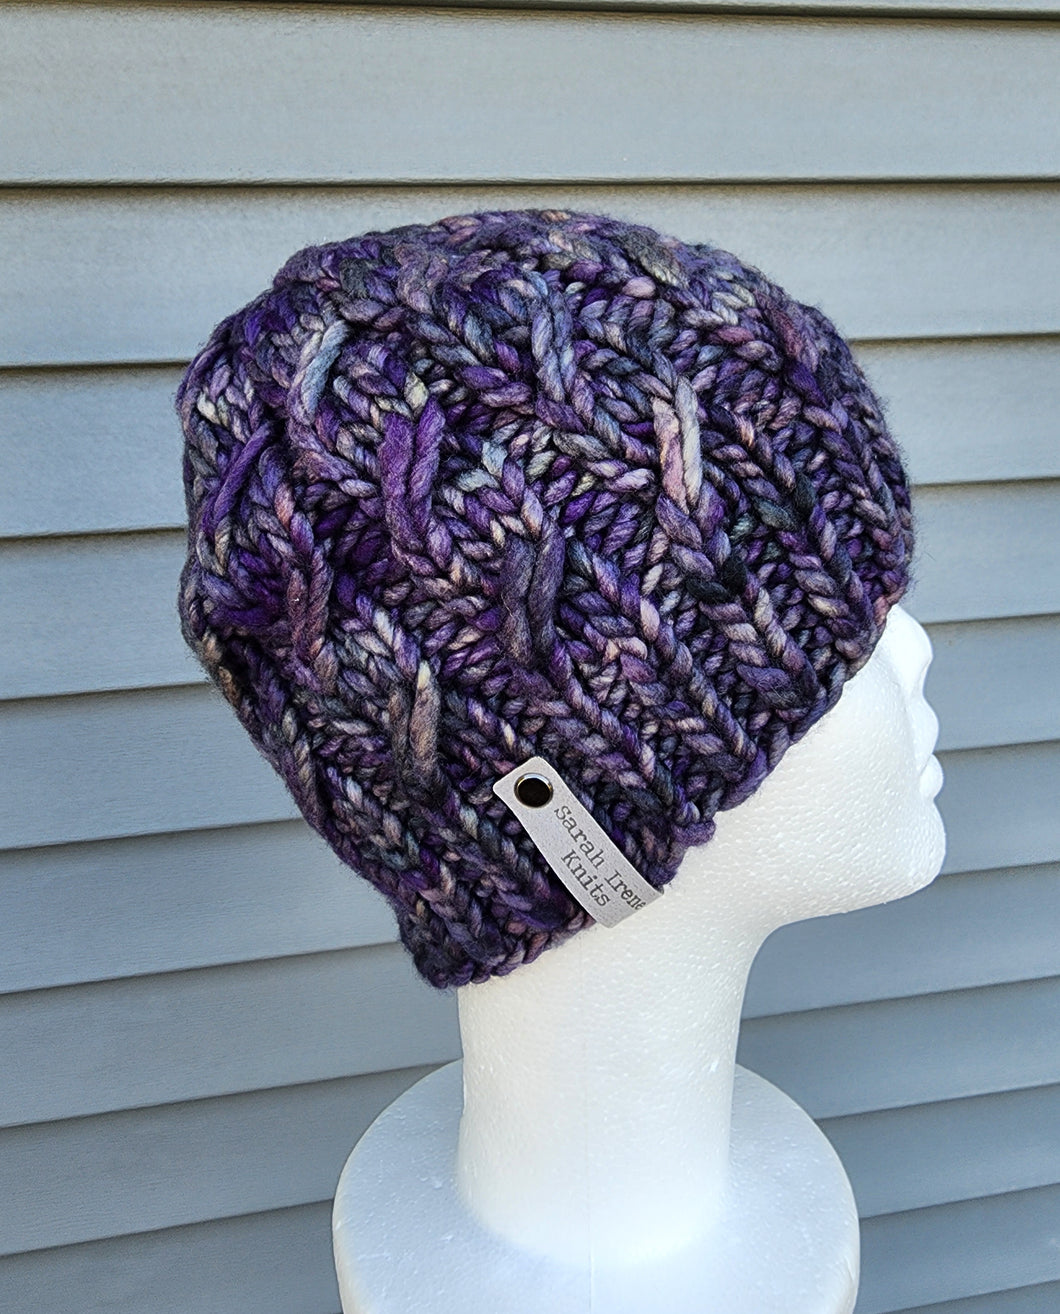 Braided effect beanie in purple grey colors. No pom.